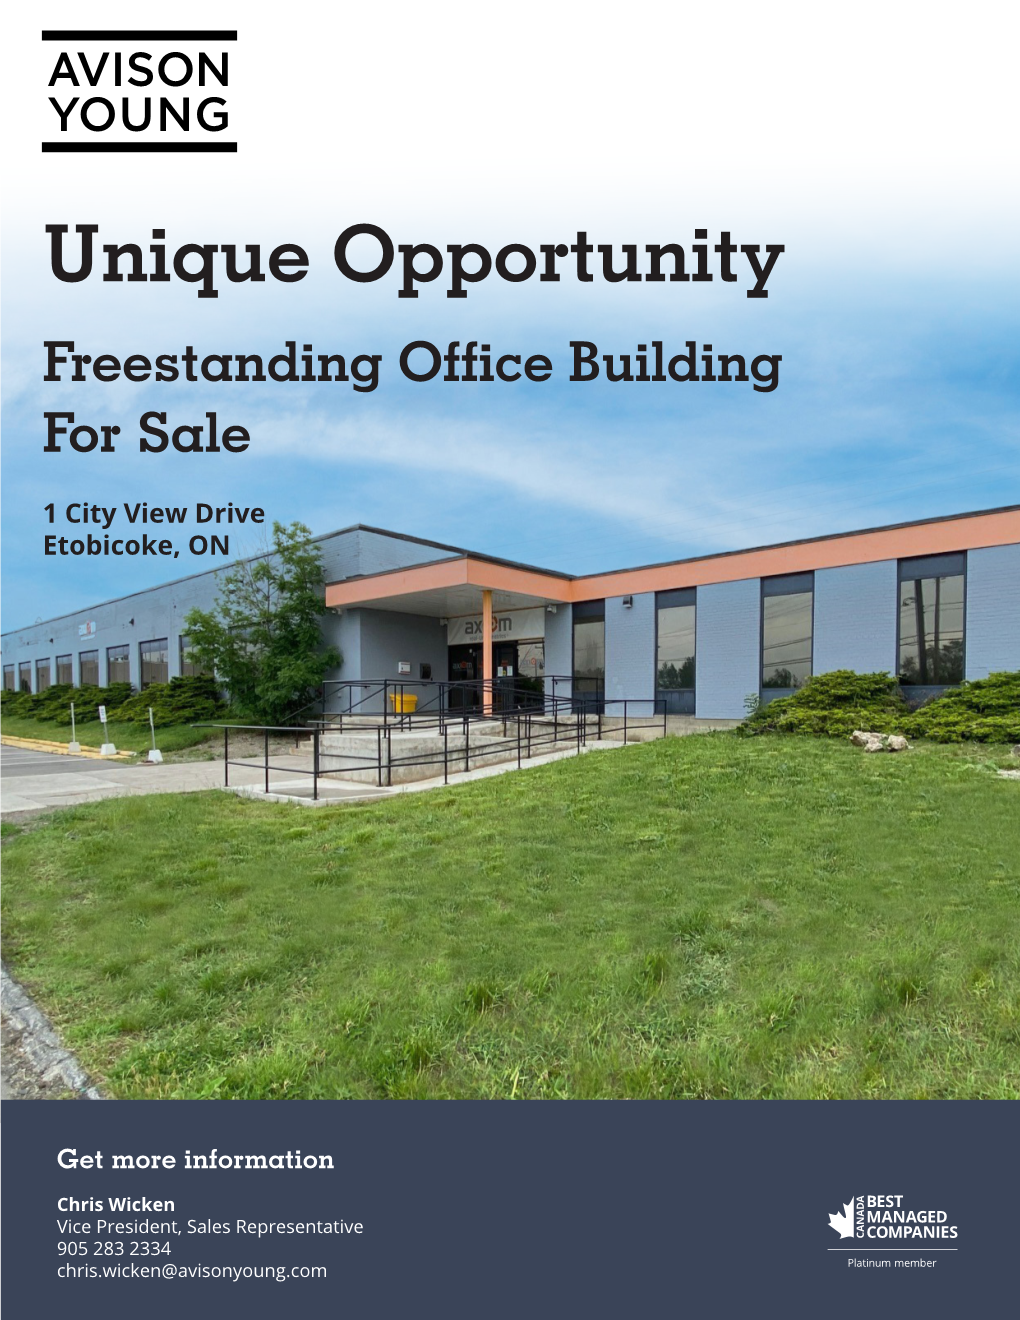 Unique Opportunity Freestanding Office Building for Sale